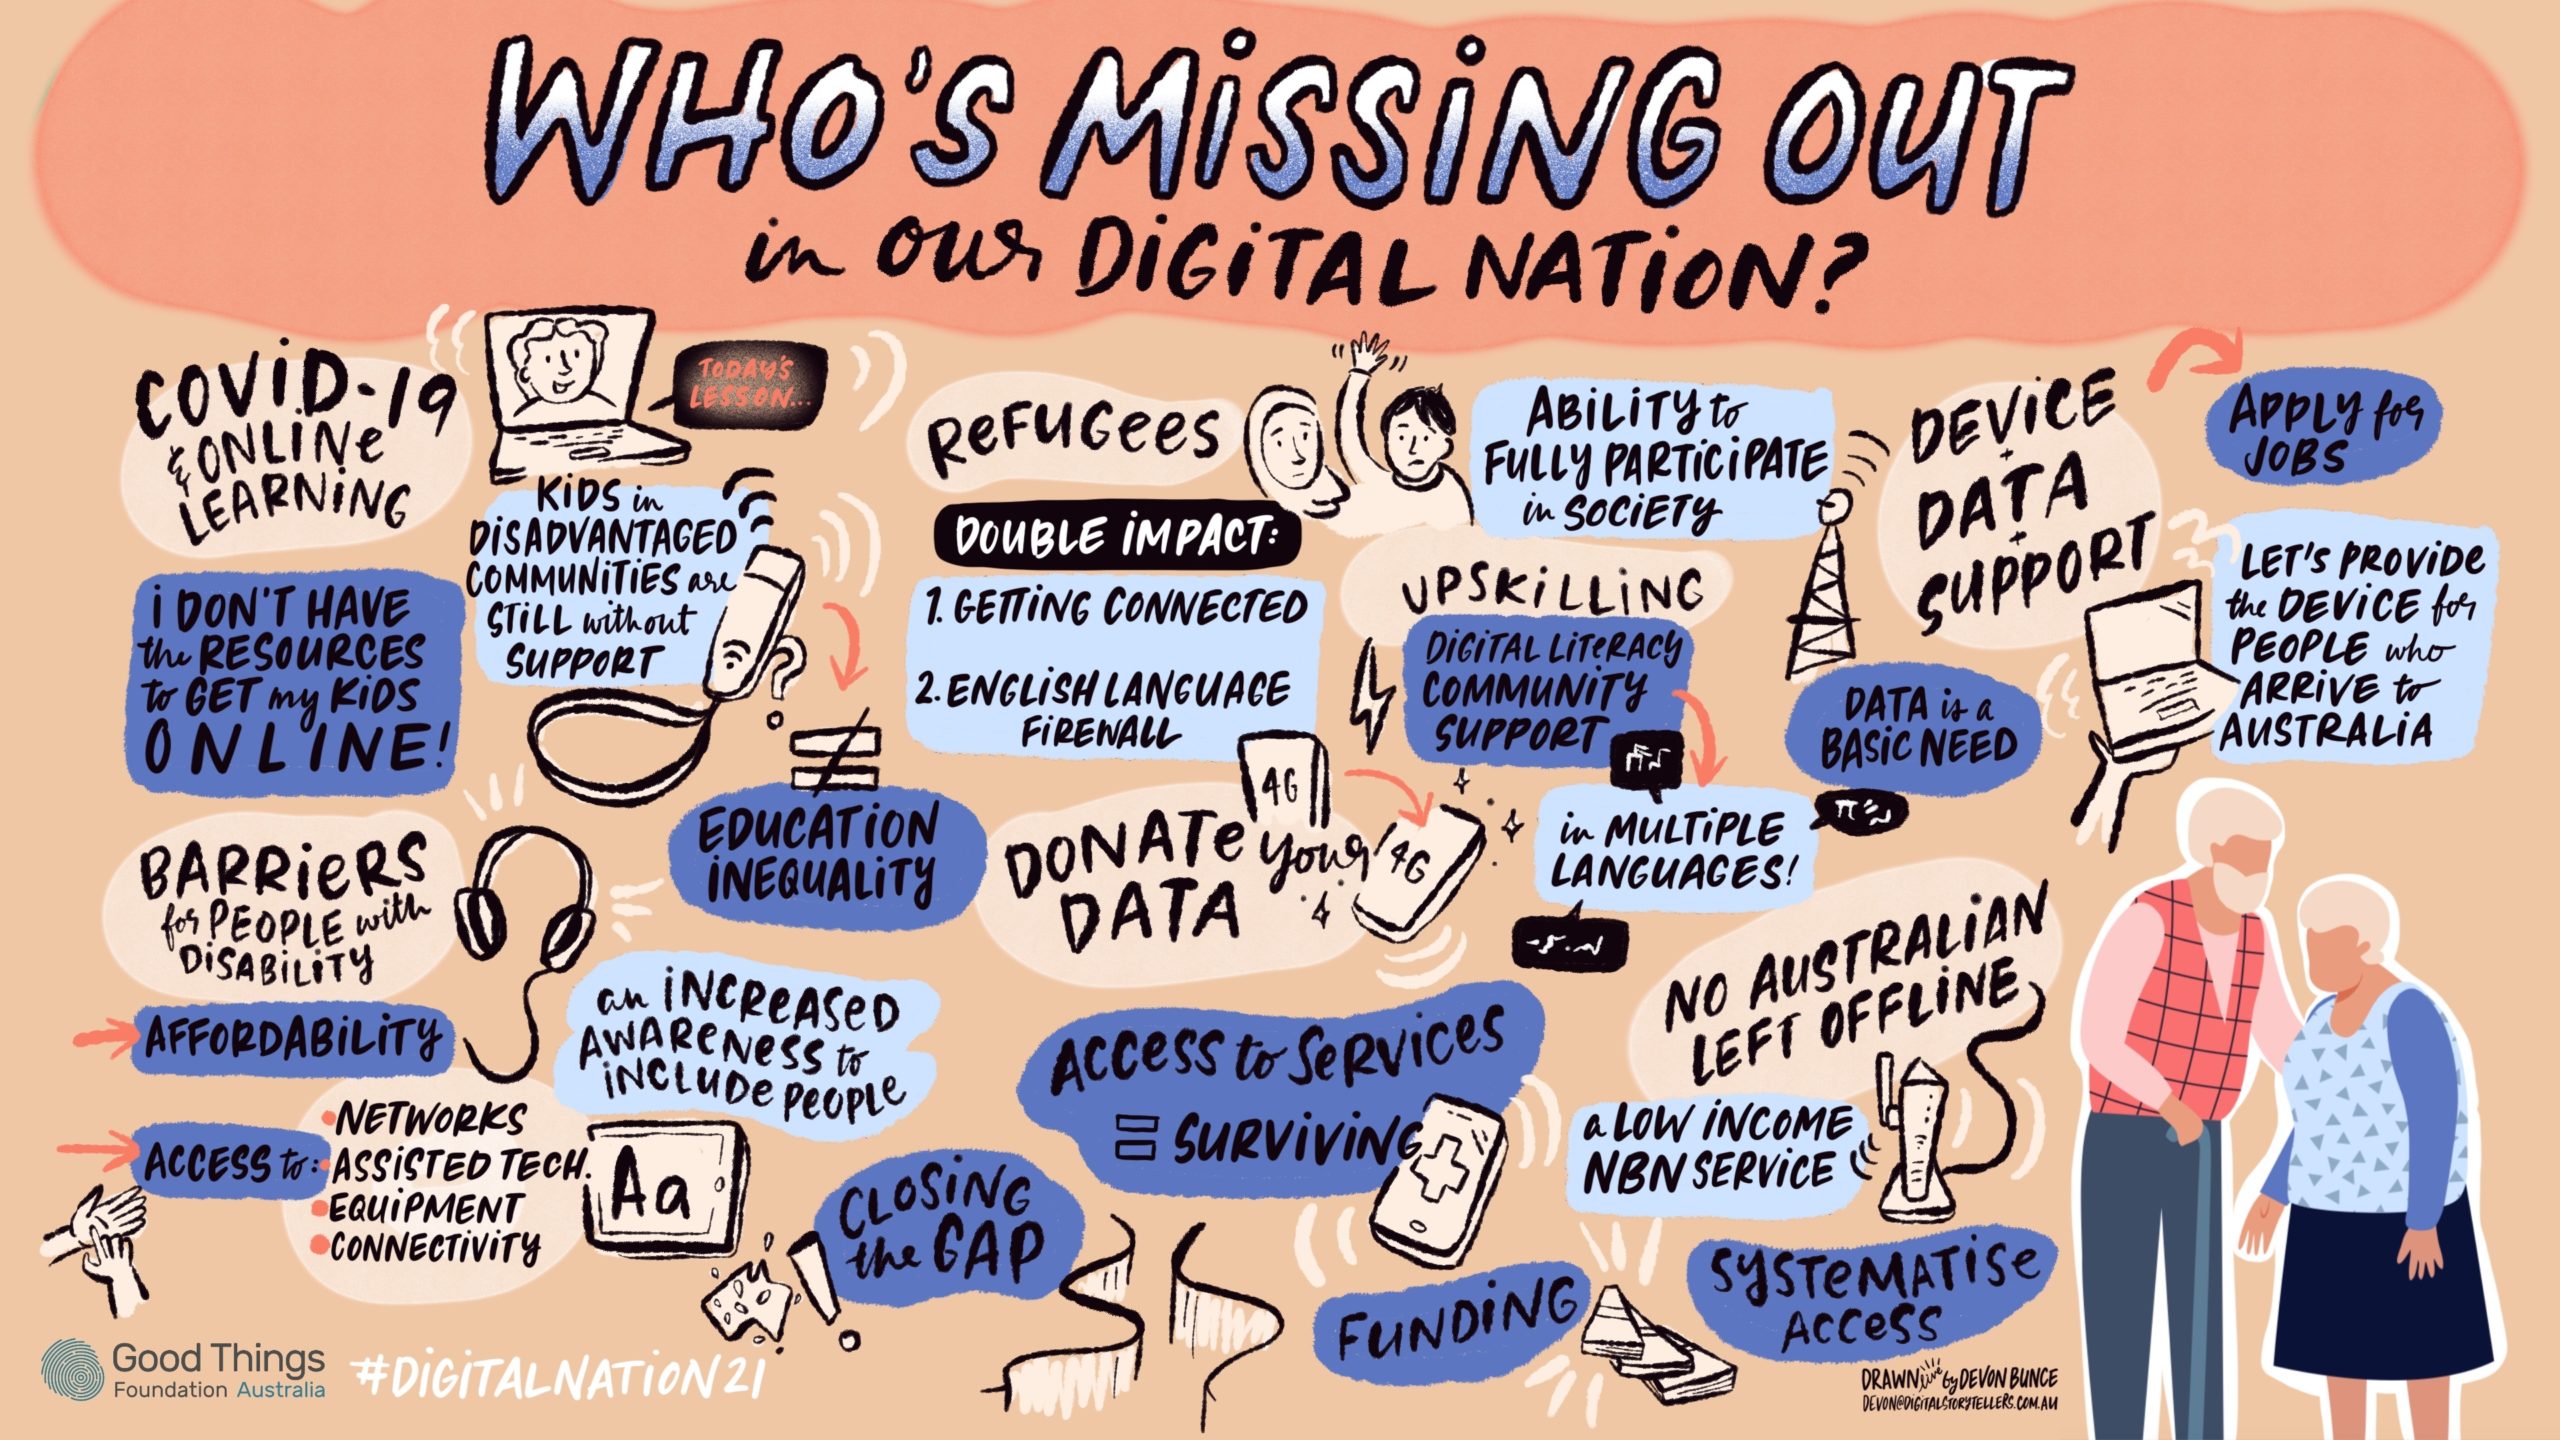 Infographic with the title 'Who's missing out in our digital nation?'. Top left section reads 'COVID-19 & Online learning' with connected bubbles reading 'I don't have the resources to get my kids online!', 'Kids in disadvantaged communities are still without support.' and 'Education inequality'. Bottom left section reads 'Barriers for people with disability', with the connected bubbles reading 'Affordability' and 'Access to networks, assisted tech, equipment, connectivity.' To the right reads 'an increased awareness to include people'. Top centre section reads 'Refugees'. Connected bubble reads 'Double impact: 1. Getting connected 2. English language firewall'. Bubble to right reads 'Ability to fully participate in society'. In the bottom centre there is a drawing of a divide in land, surrounded by text bubbles reading: 'Closing the gap', 'Access to services = surviving', 'Funding', 'Systematic access'. Right section outlines different ways to help close the digital divide. Text bubbles read: 'Donate your data'. 'Upskilling', 'Device data support: Apply for jobs', 'Digital literacy community support in multiple languages', 'Data is a basic need', 'No Australian left offline: a low income NBN service'. To the far right is text reading 'Let's provide the device for people who arrive to Australia'. Footer text reads '#DigitalNation21' with logo for Good Things Foundation Australia and logo reading 'Drawn by Devon Bunce devon@digitalstorytellers.com.au'